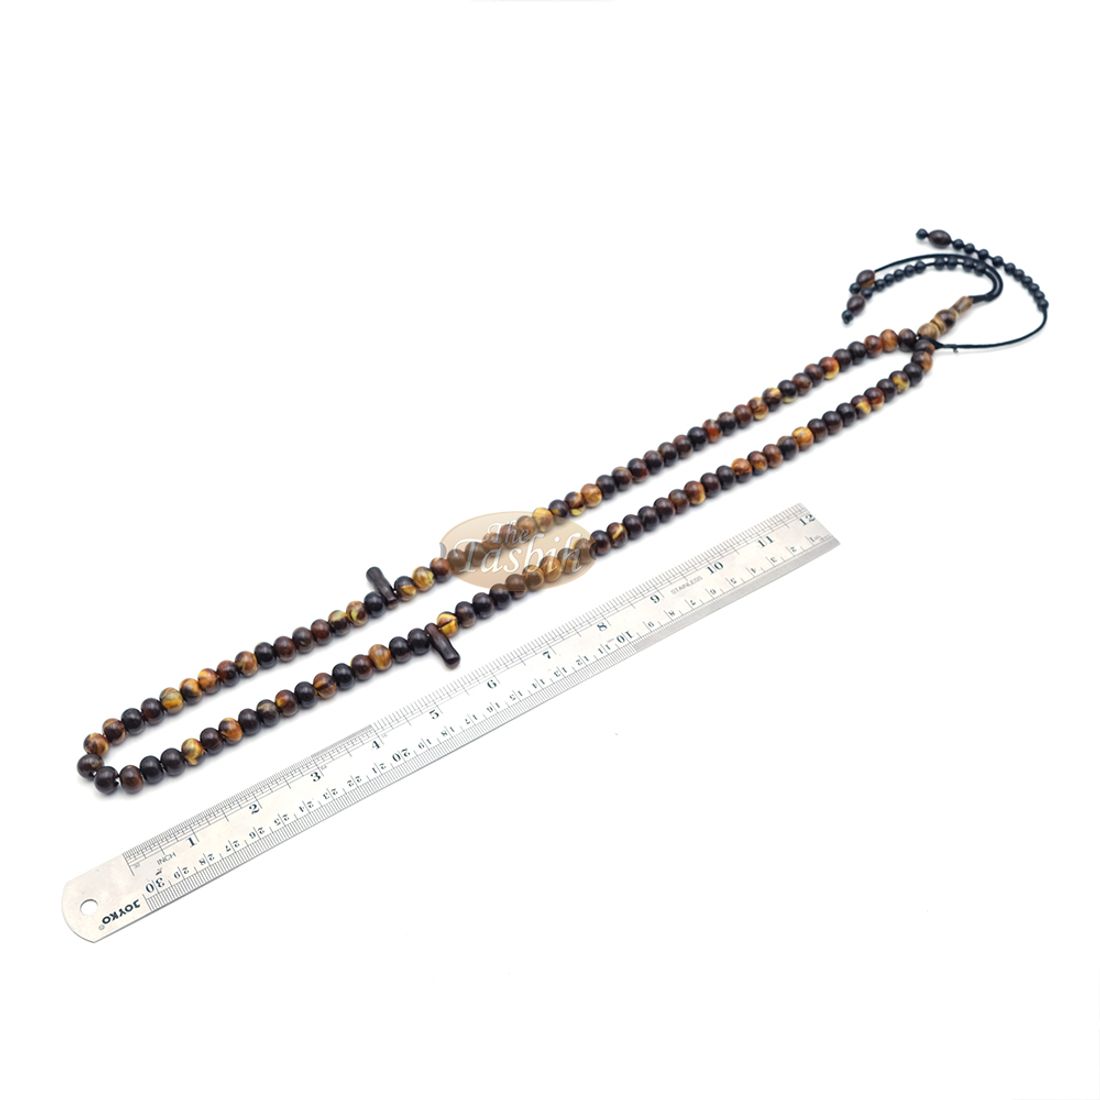 West African 100-bead Marble Dark Brown Flat Oval Bead Tasbih (33,34,33 sections)